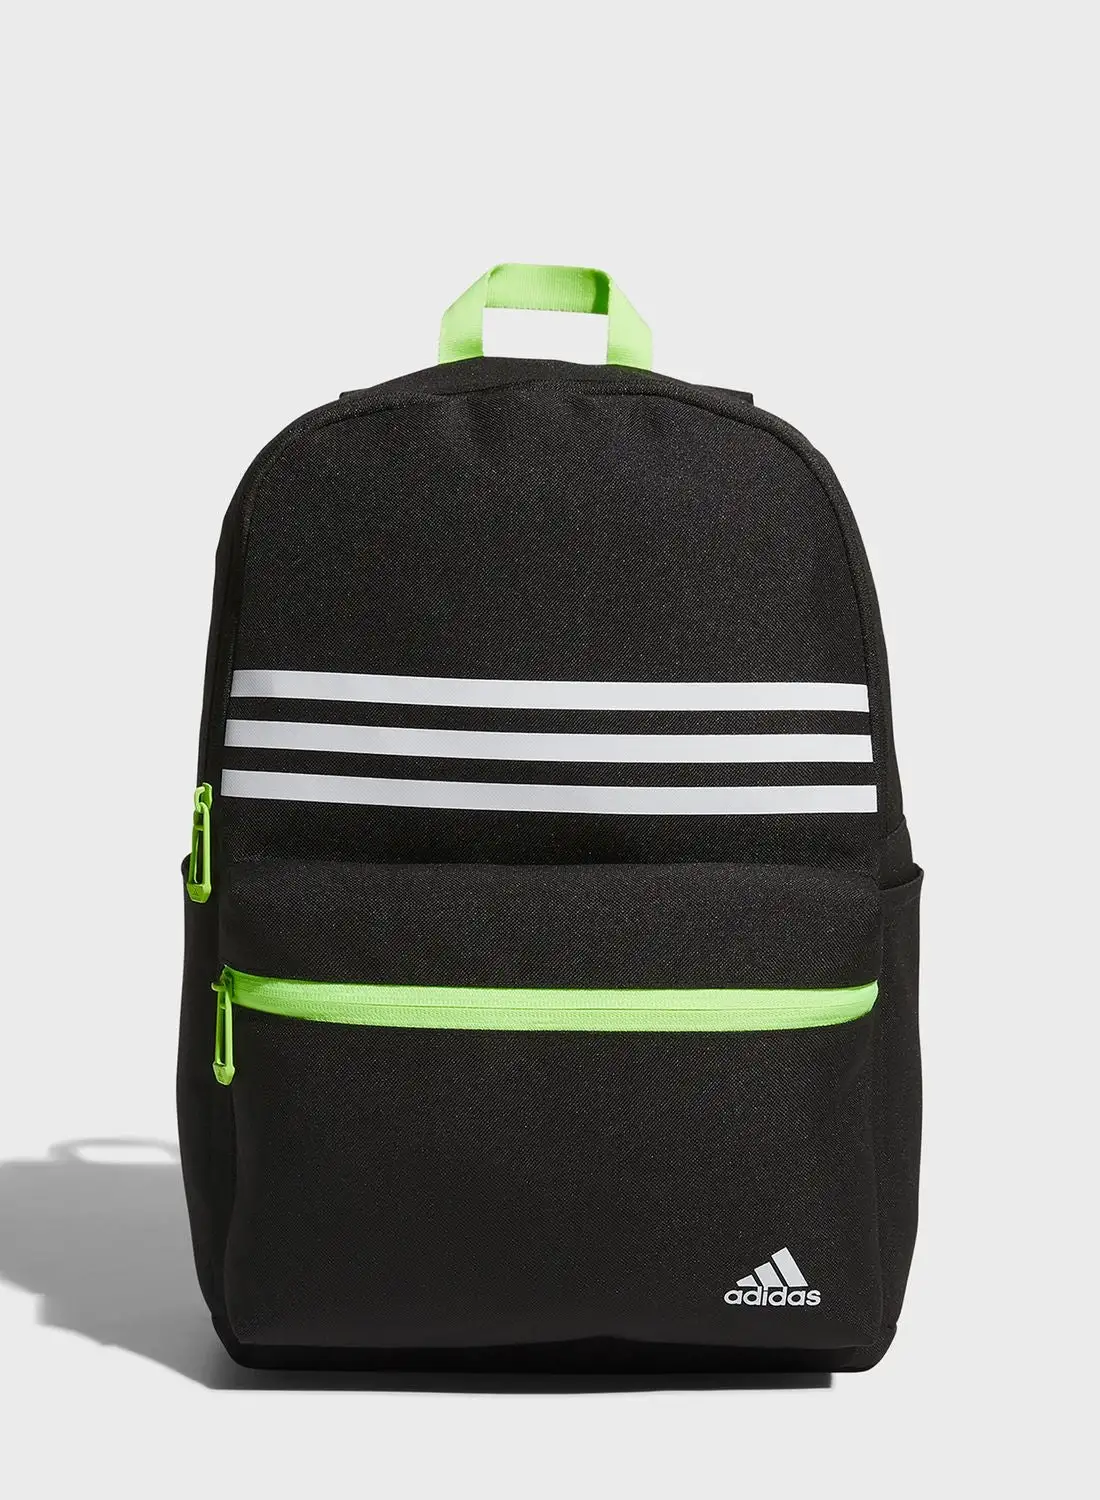 Adidas Little Classic Backpack